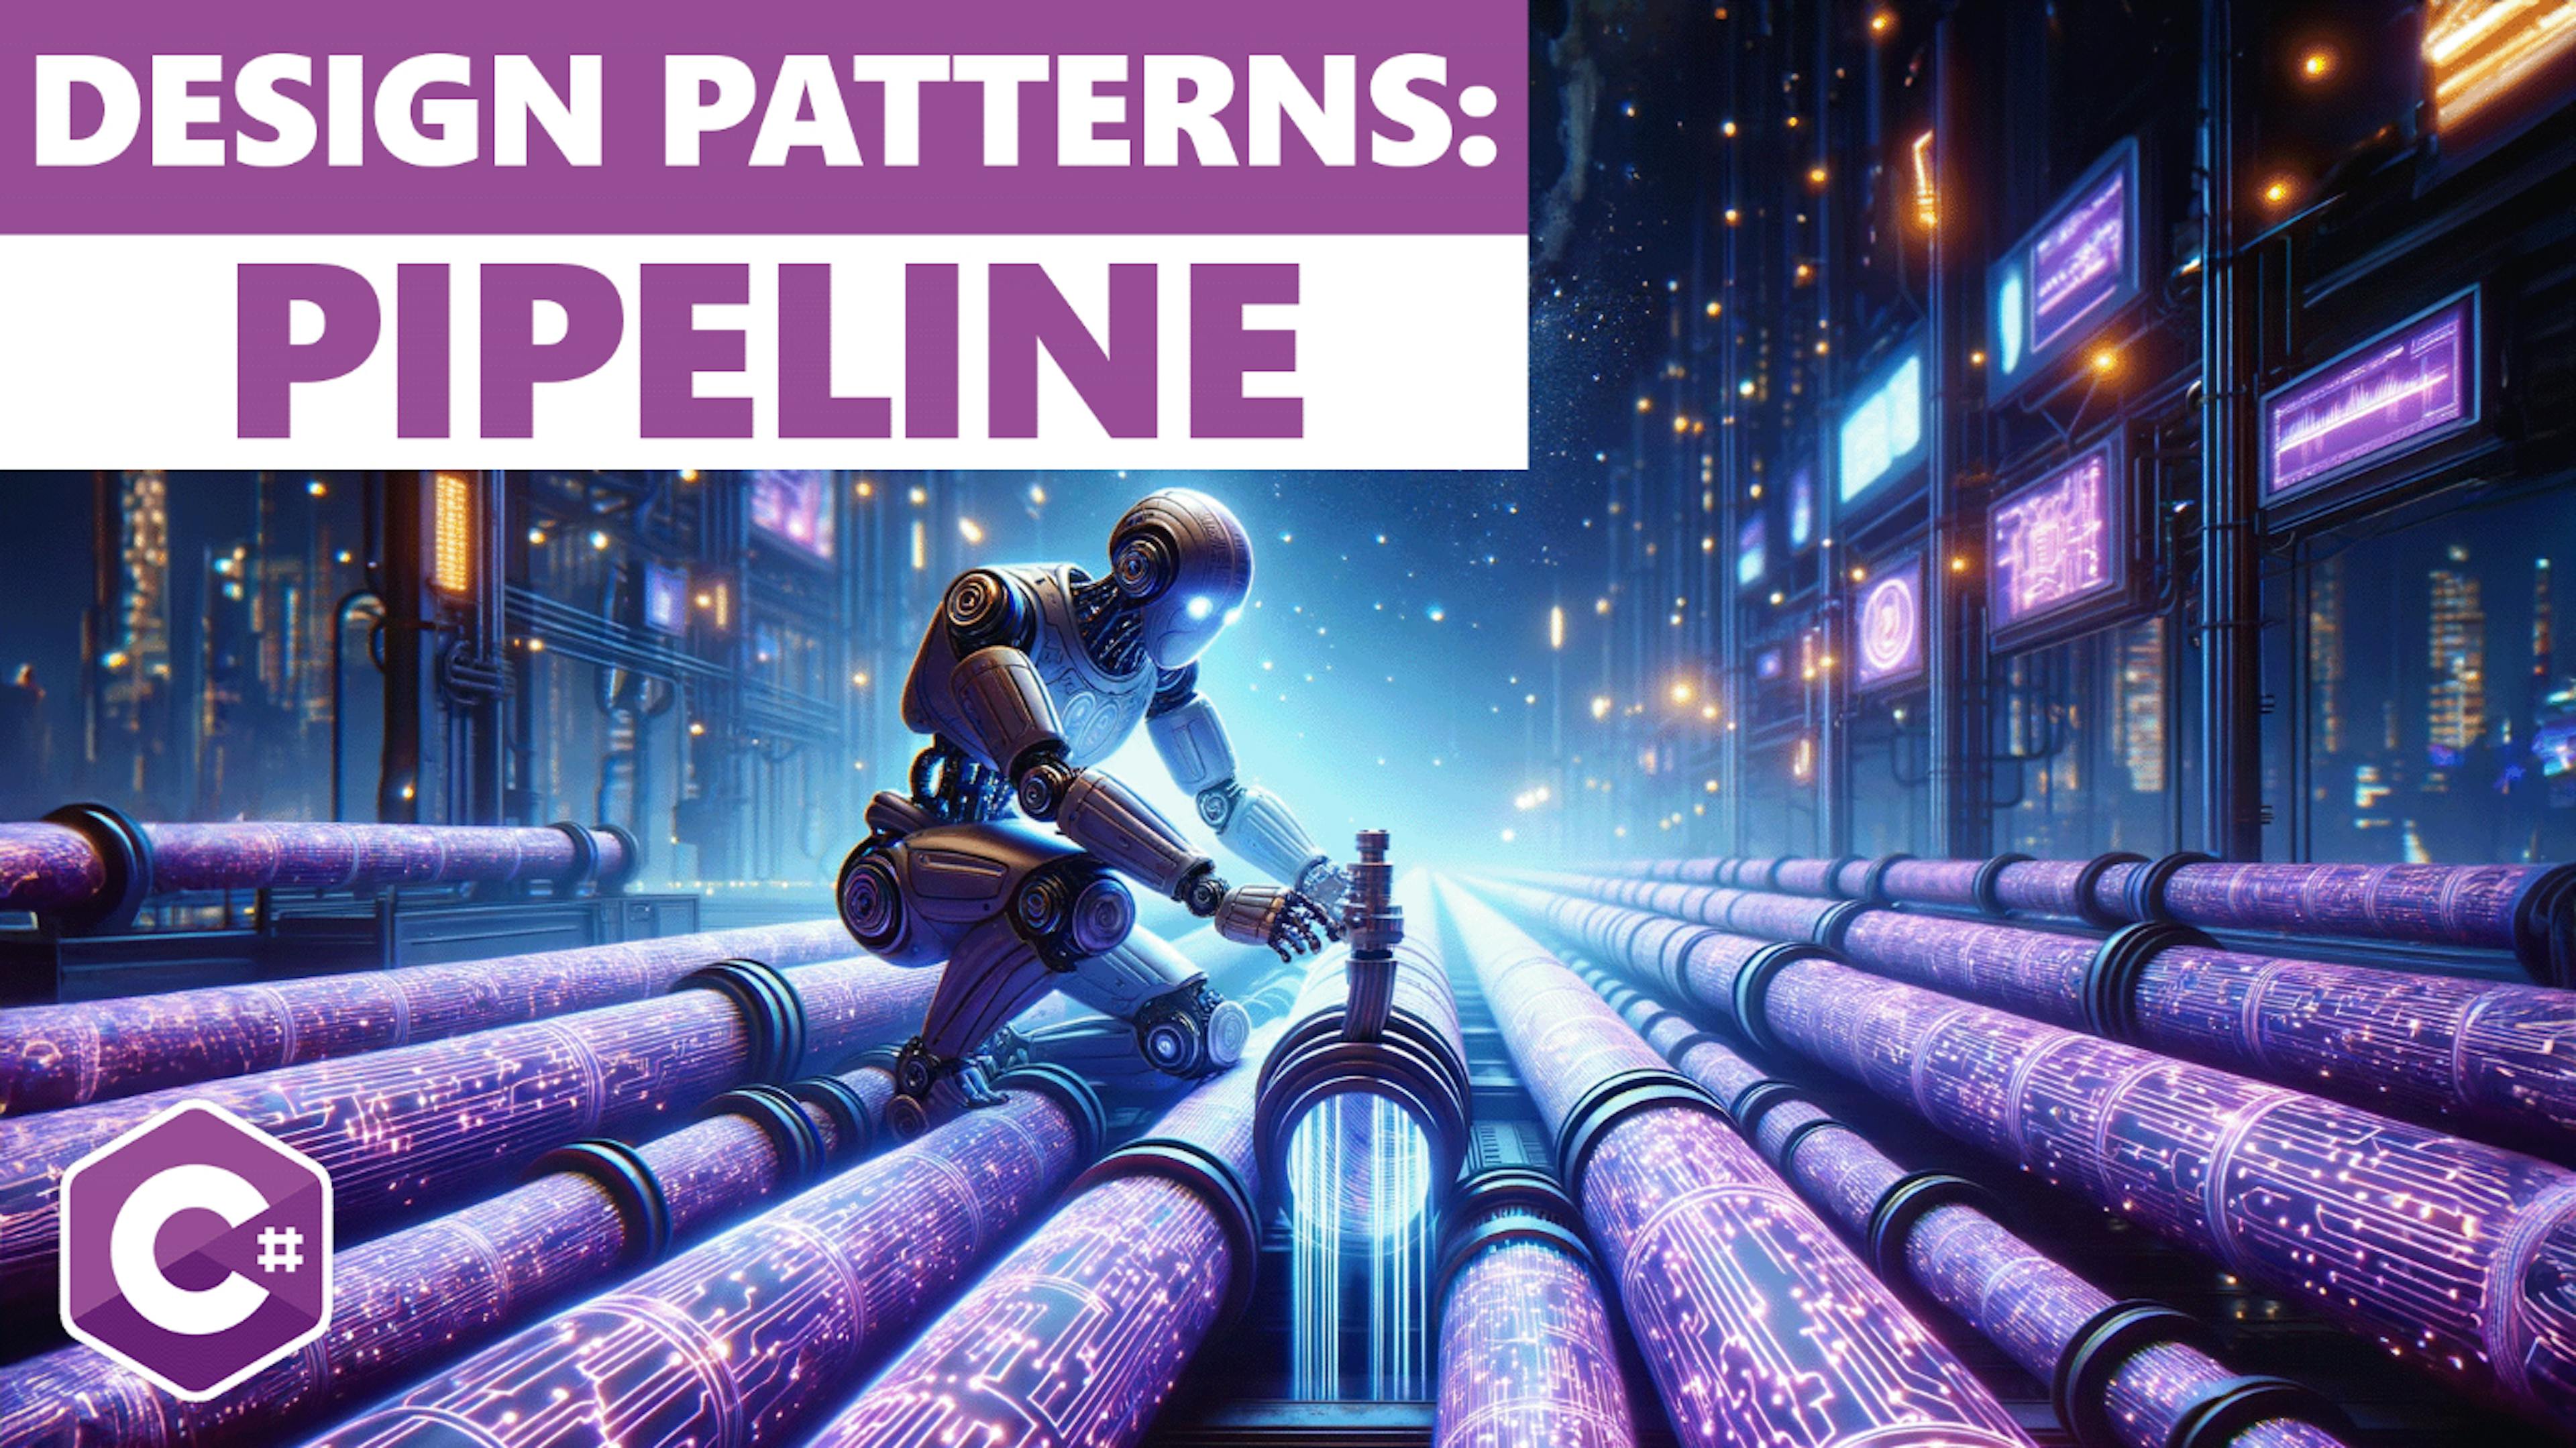 featured image - The Pipeline Design Pattern - Examples in C#